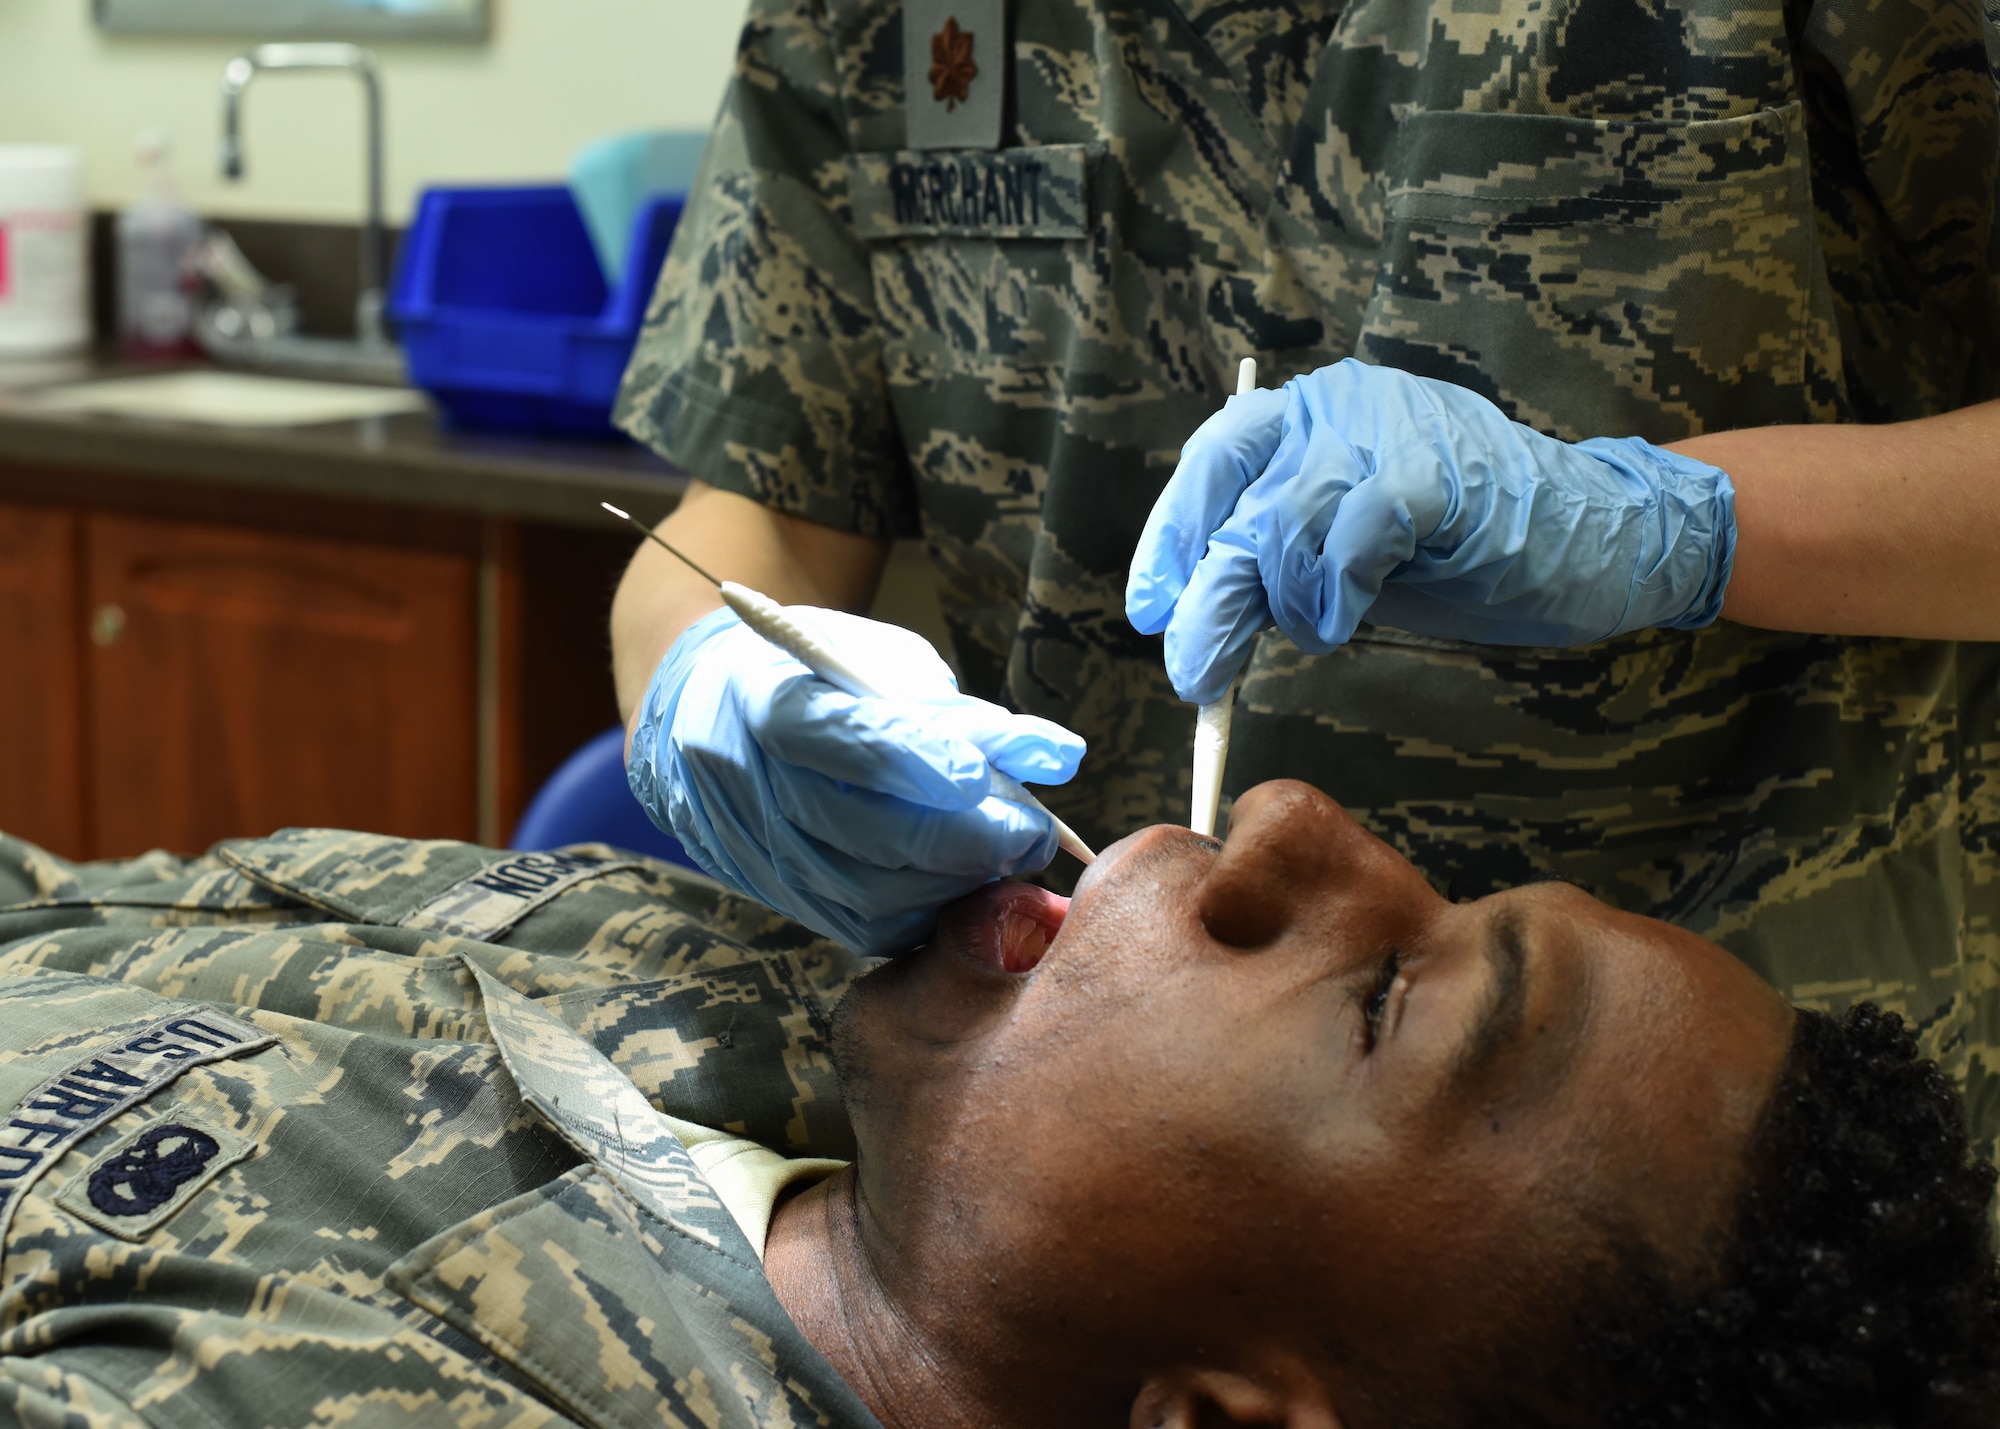 Air Force Maj. Lindsey Merchant, 301st Medical Squadron dentist, performs a dental exam for a patient in an exam room, Feb. 3, 2018, at Naval Air Station Fort Worth Joint Reserve Base, Texas. Merchant has been a dentist for the Air Force since her graduation from dental school in 2010. (U.S. Air Force photo by Senior Airman Katherine Miller)